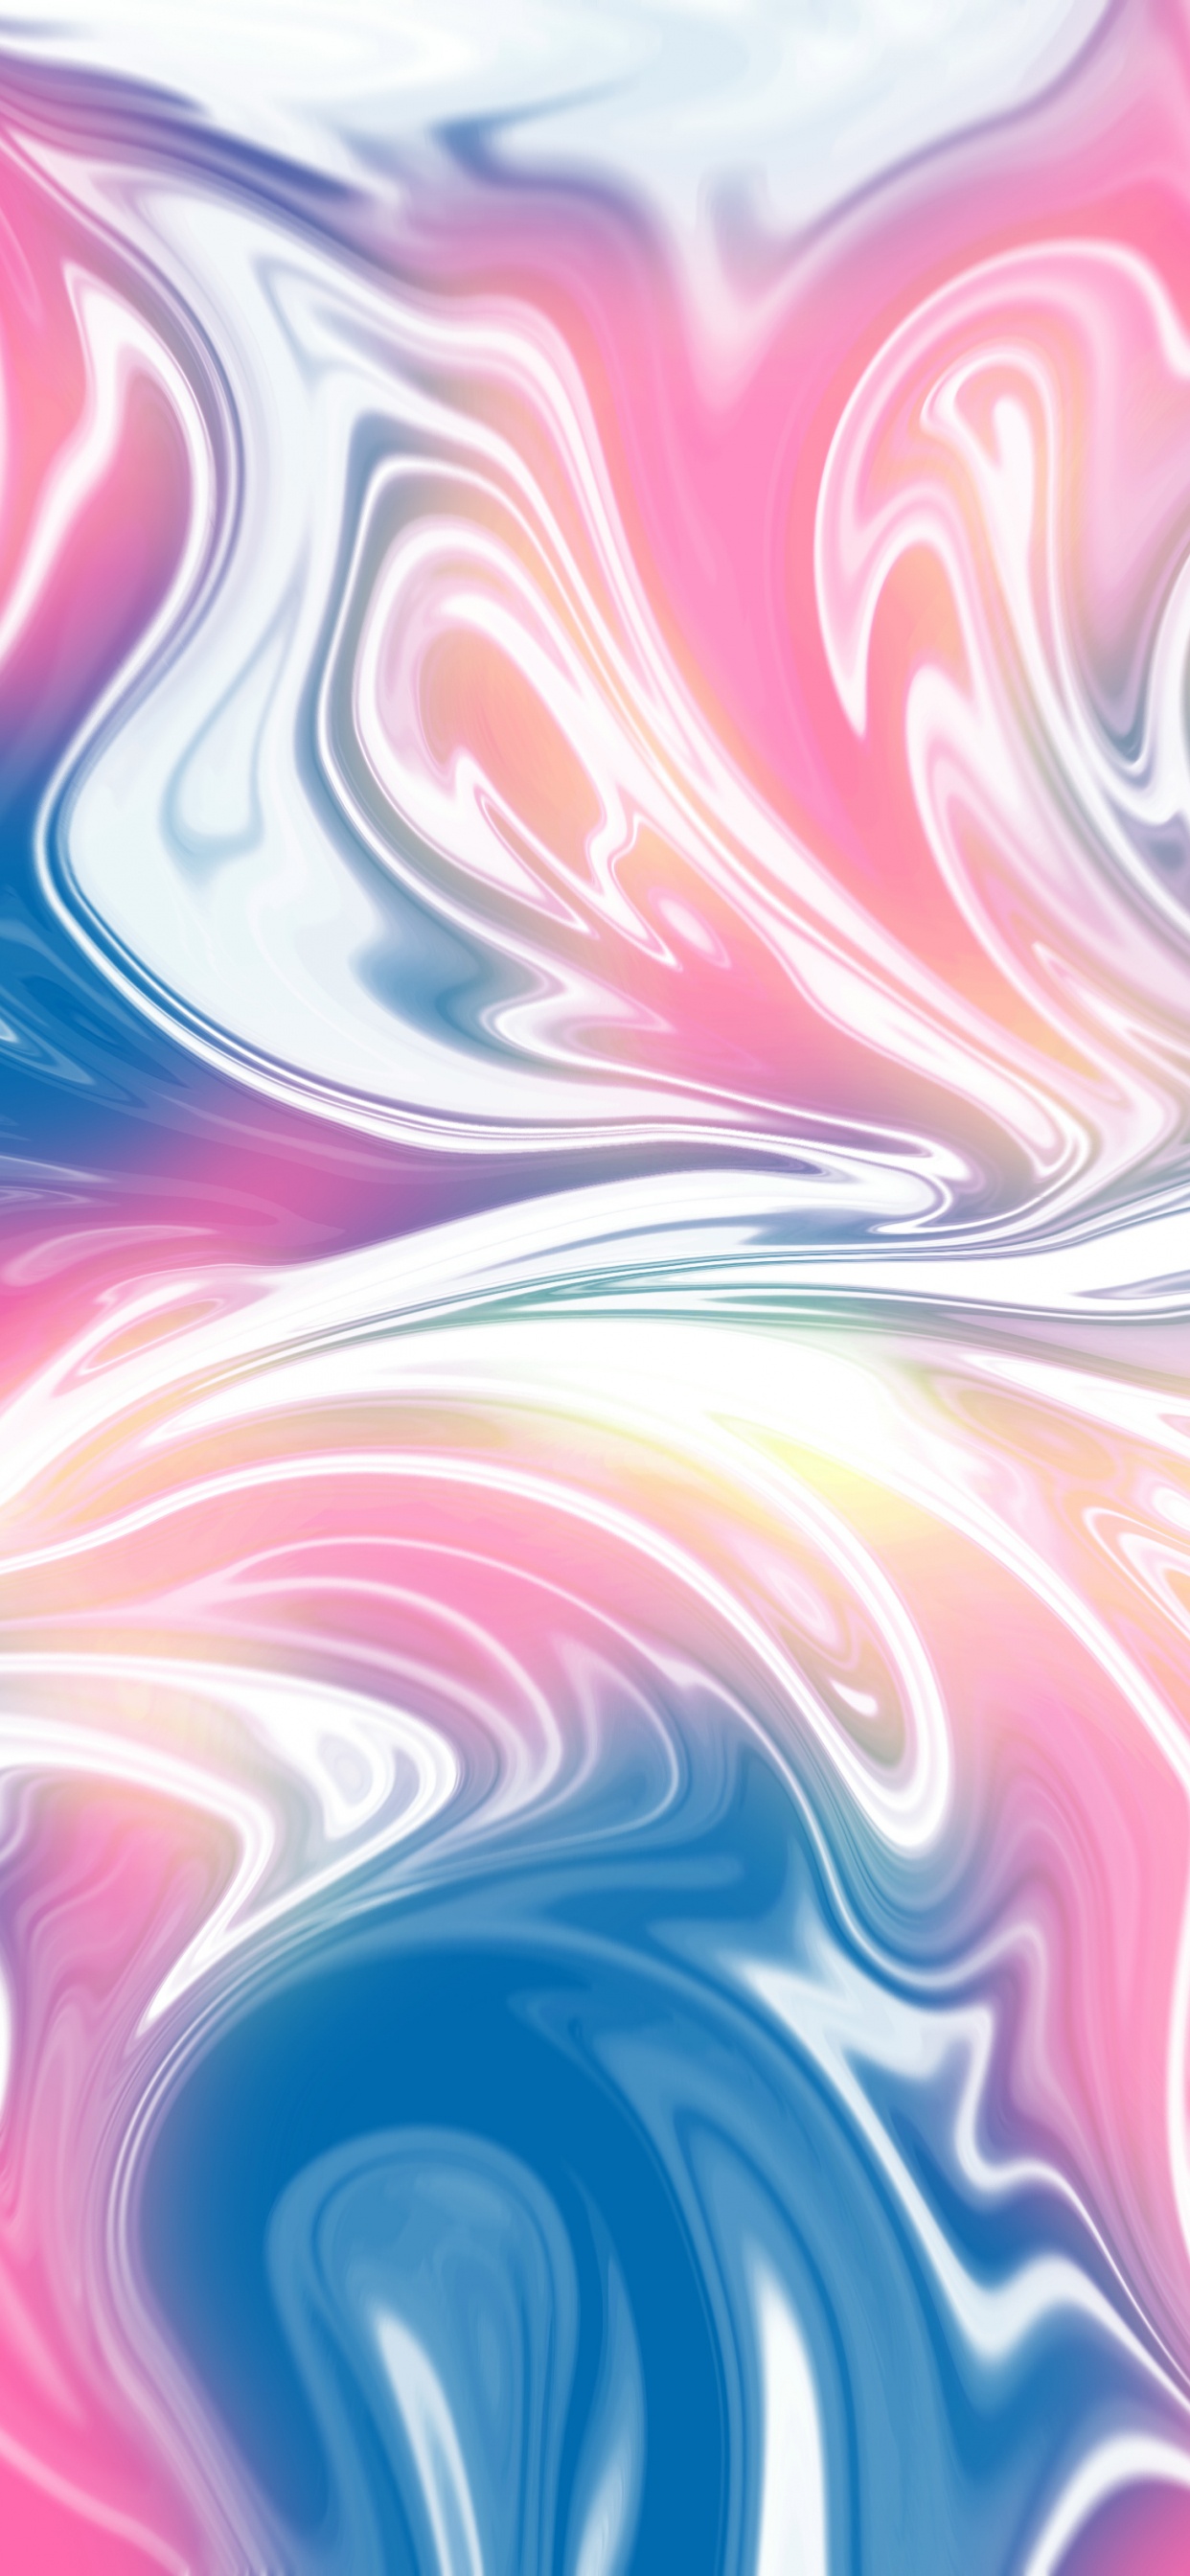 Pink White and Blue Abstract Painting. Wallpaper in 1242x2688 Resolution